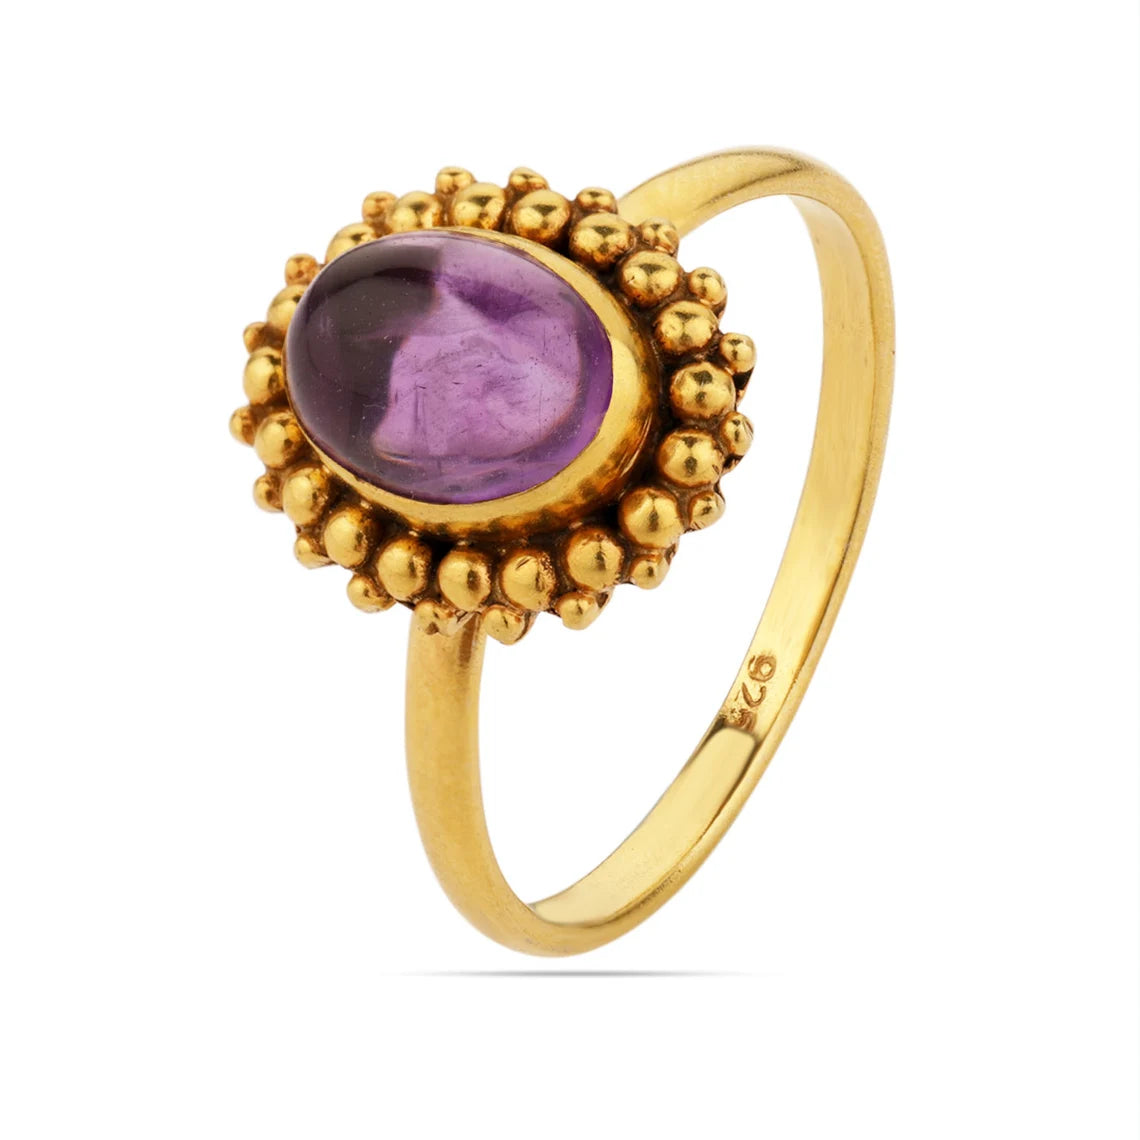 Purple Amethyst Gold Ring February Birthstone Ring, 18k Gold Plated Oval Ring, birthday gift, stackable ring Amethyst Gemstone Ring